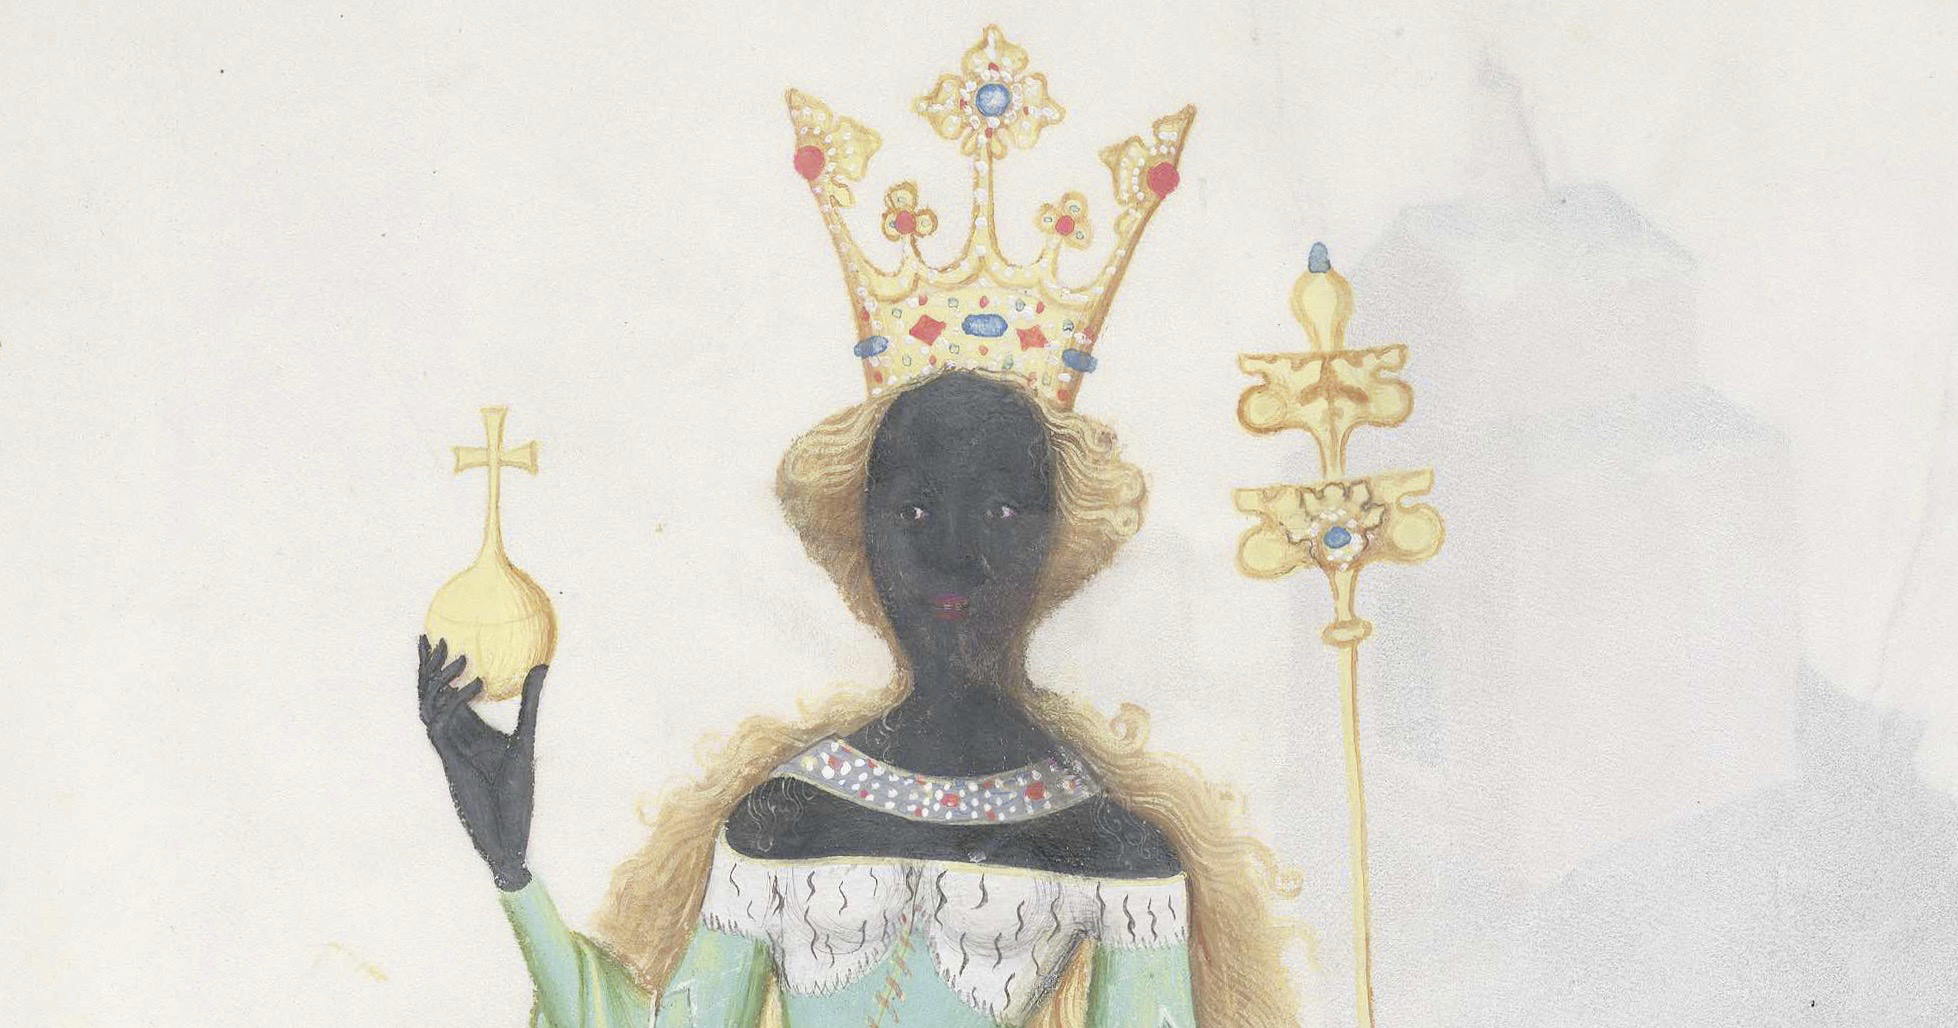 How Did The Queen Of Sheba Come To Be Seen As Black? December 2021 The Jewish Experience Brandeis University pic